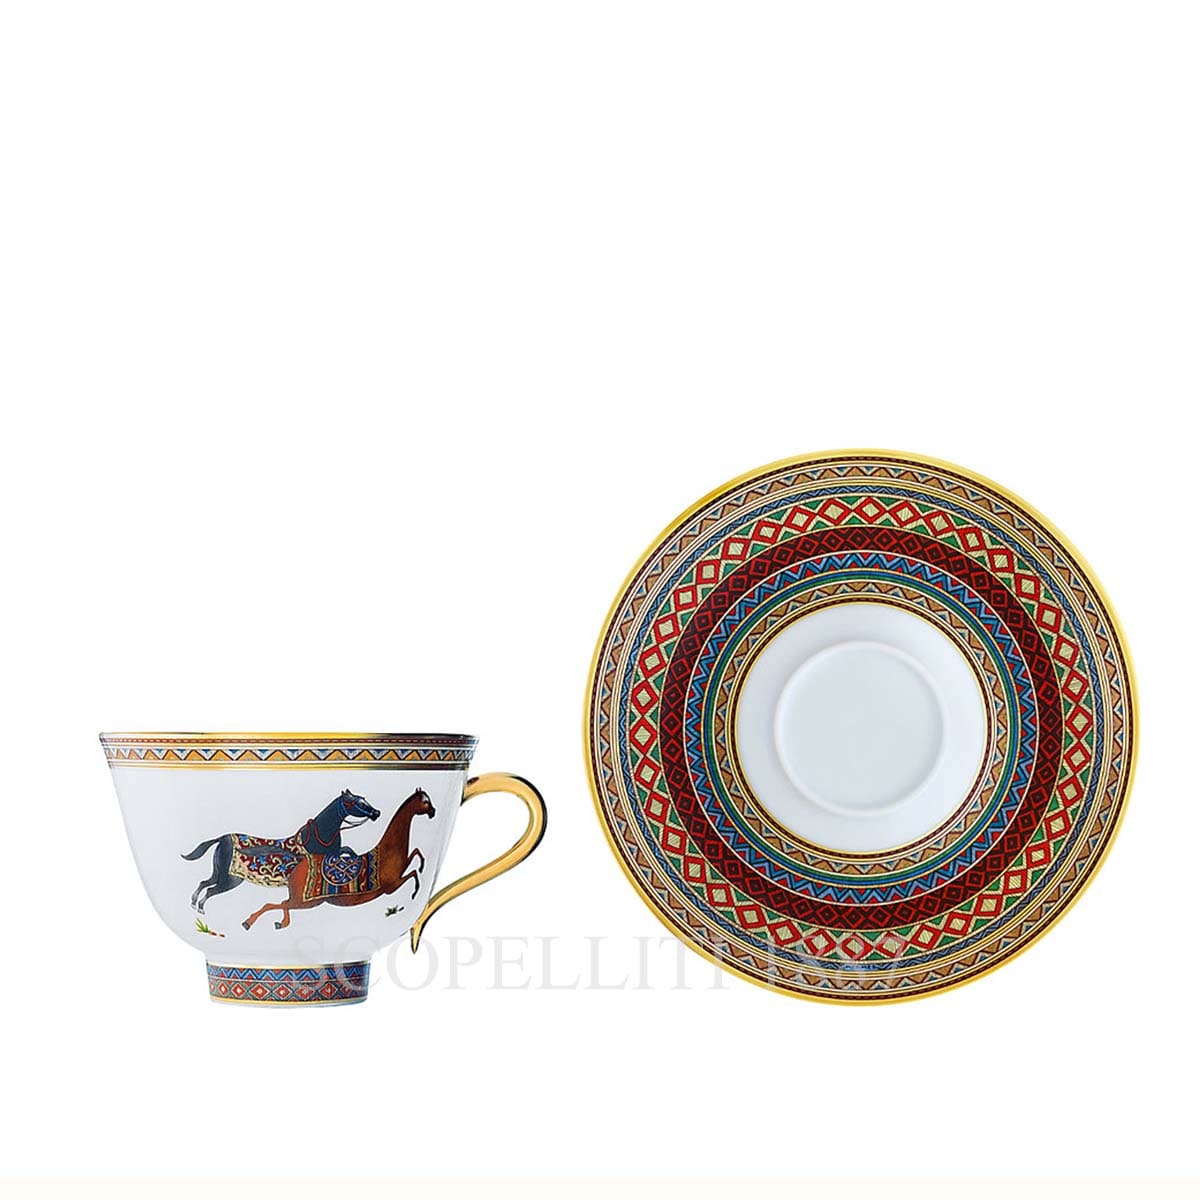 Tea Cup and Saucer n°1 Cheval d'Orient 